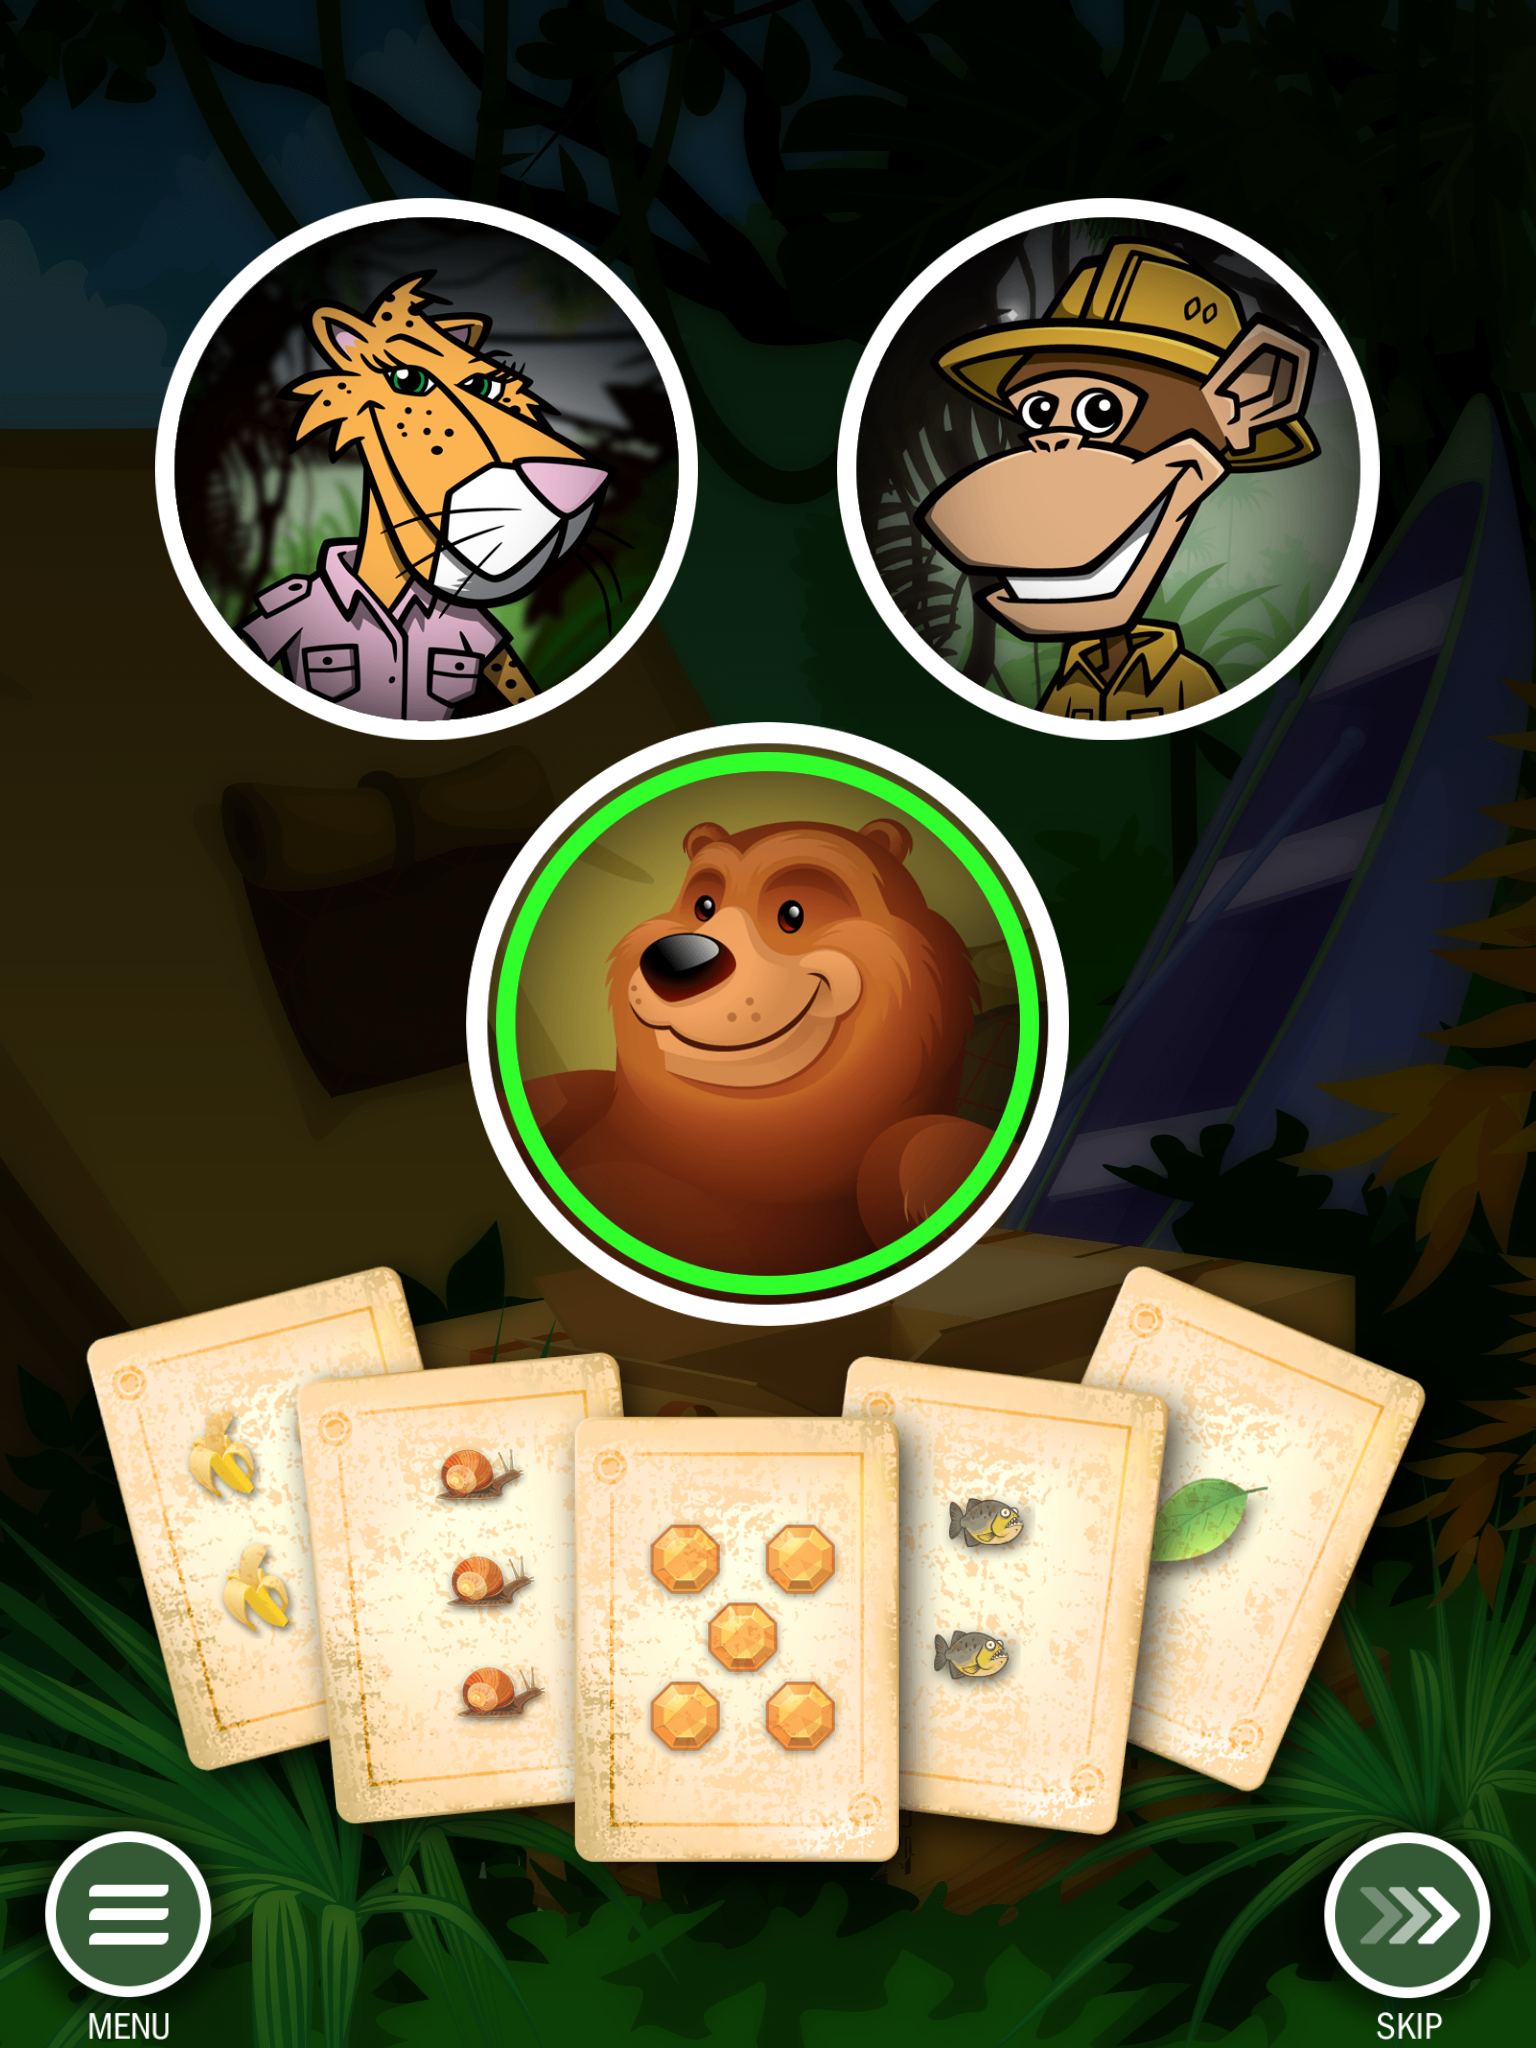 The TouchMath Adventures app includes entertaining characters, plenty of audiovisual effects, and exciting math games.